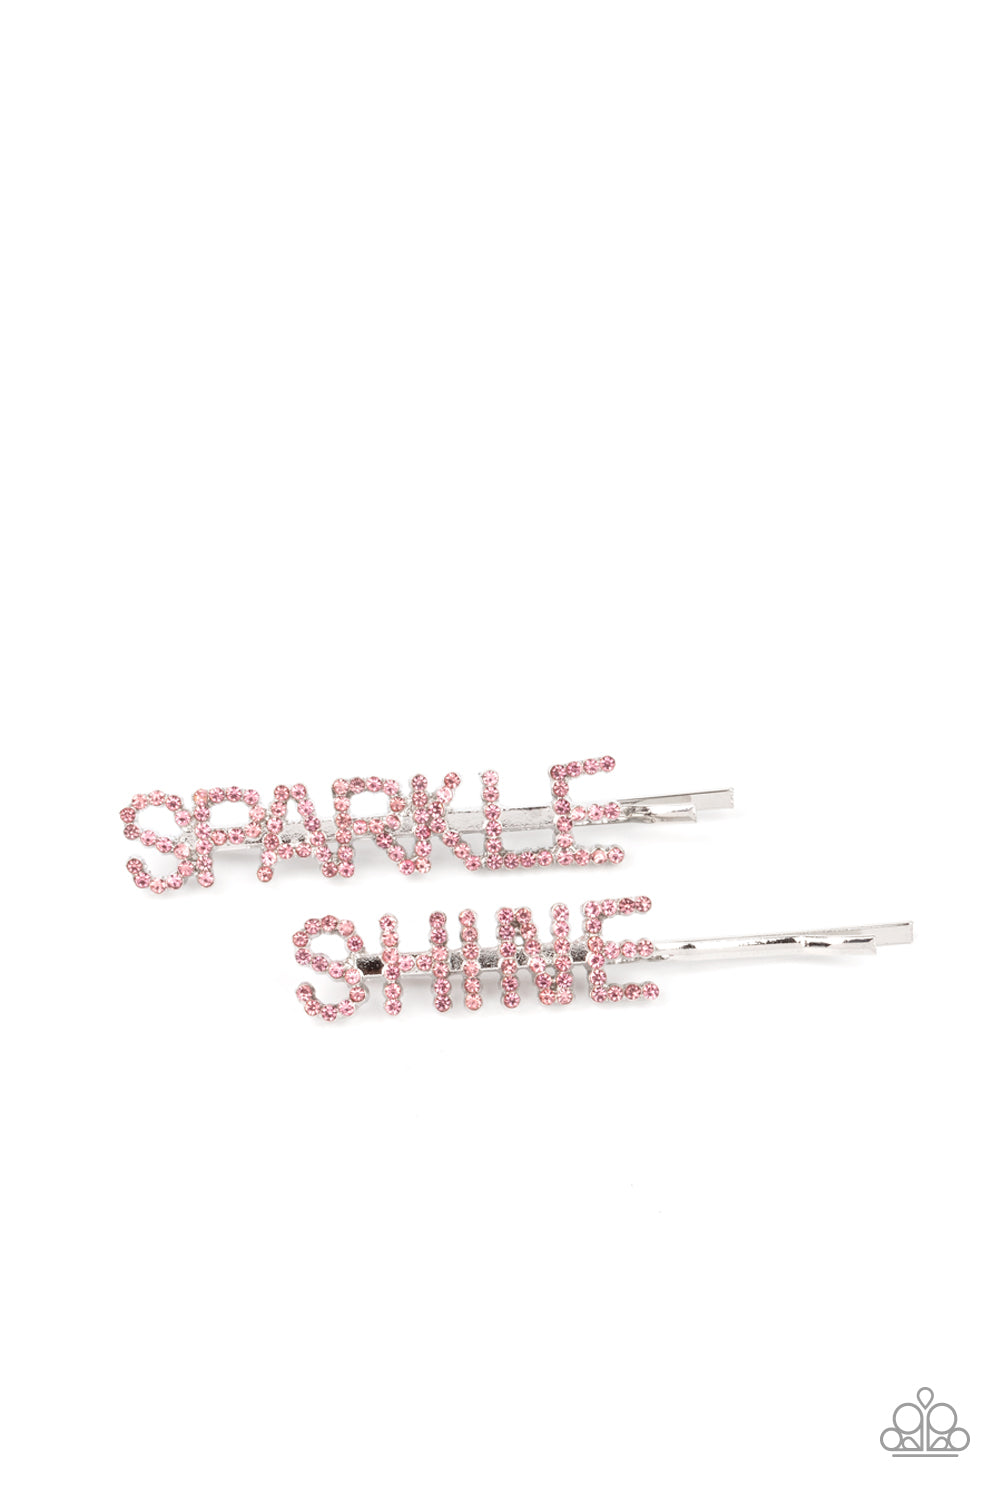 Center of the SPARKLE-verse - Pink - Paparazzi Accessories